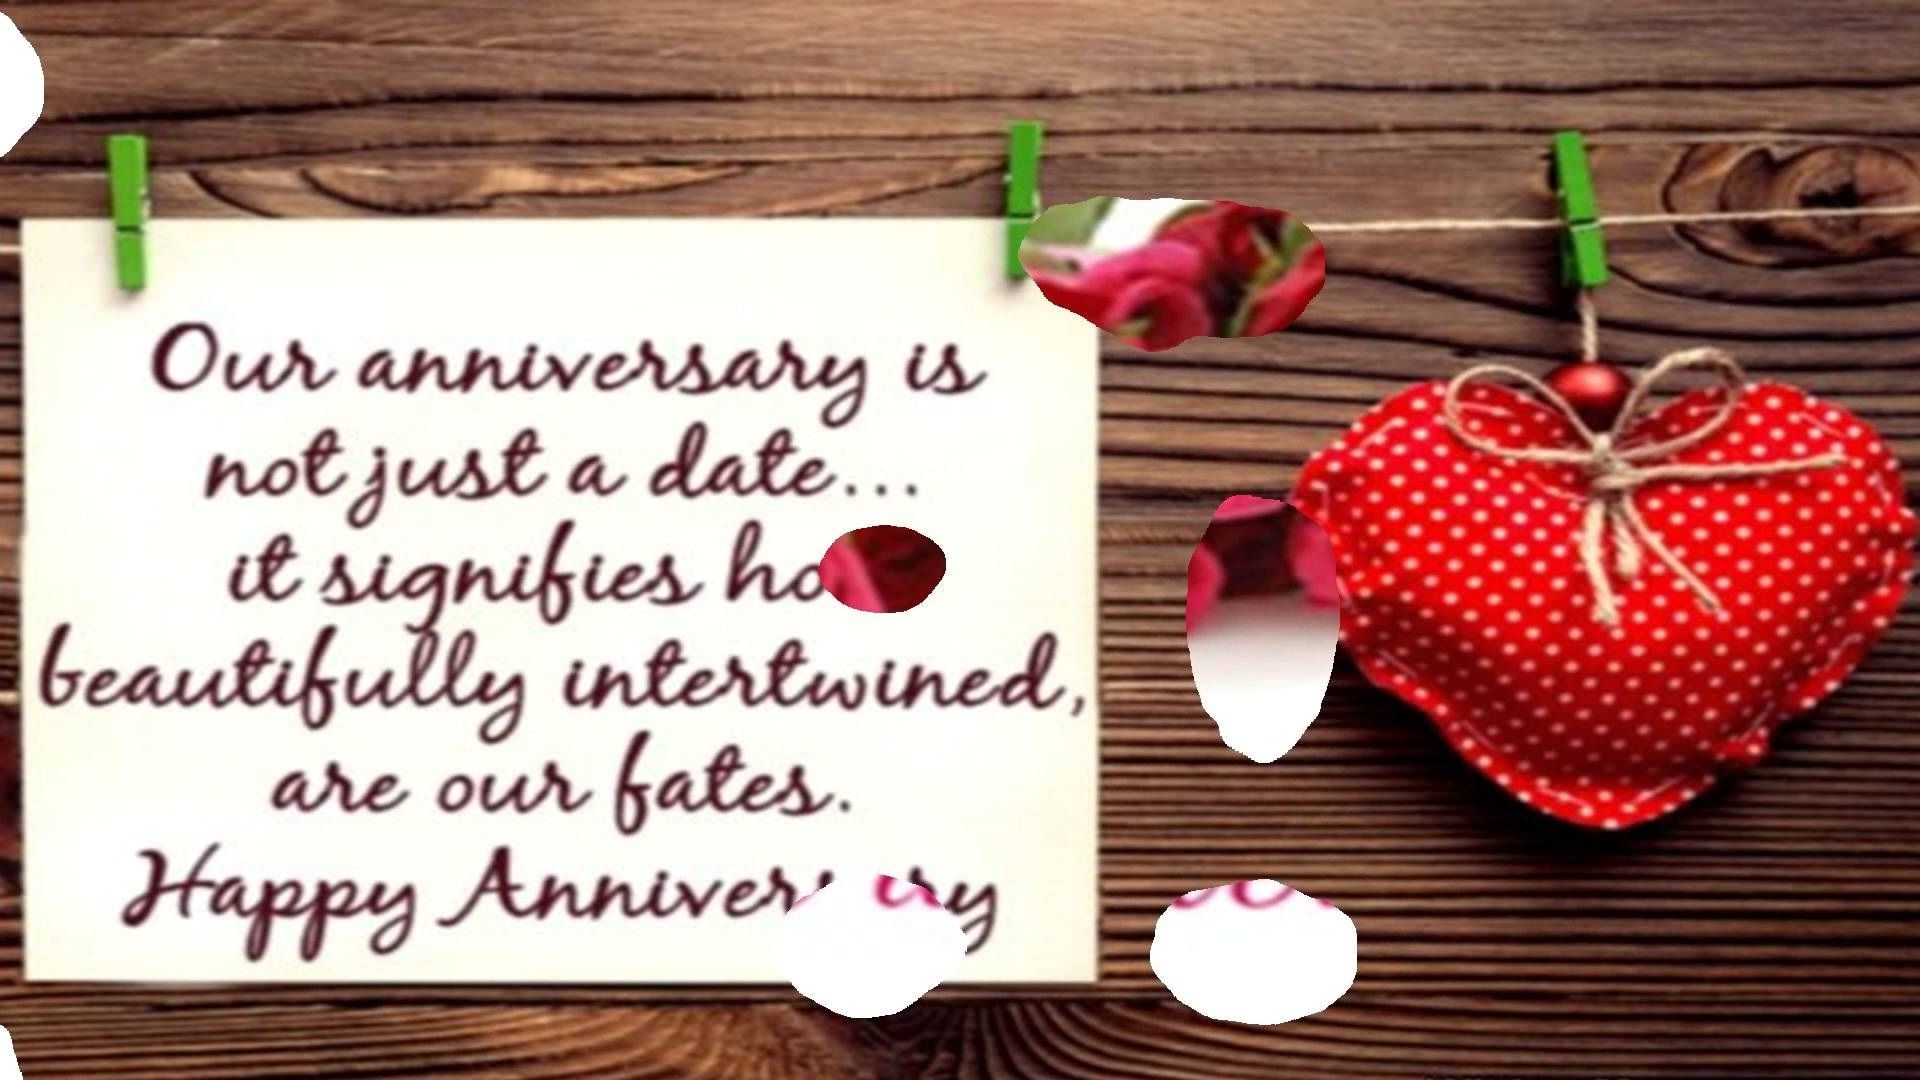 Wedding Anniversary Wallpaper 64 Images - Wedding Anniversary Quotes English , HD Wallpaper & Backgrounds